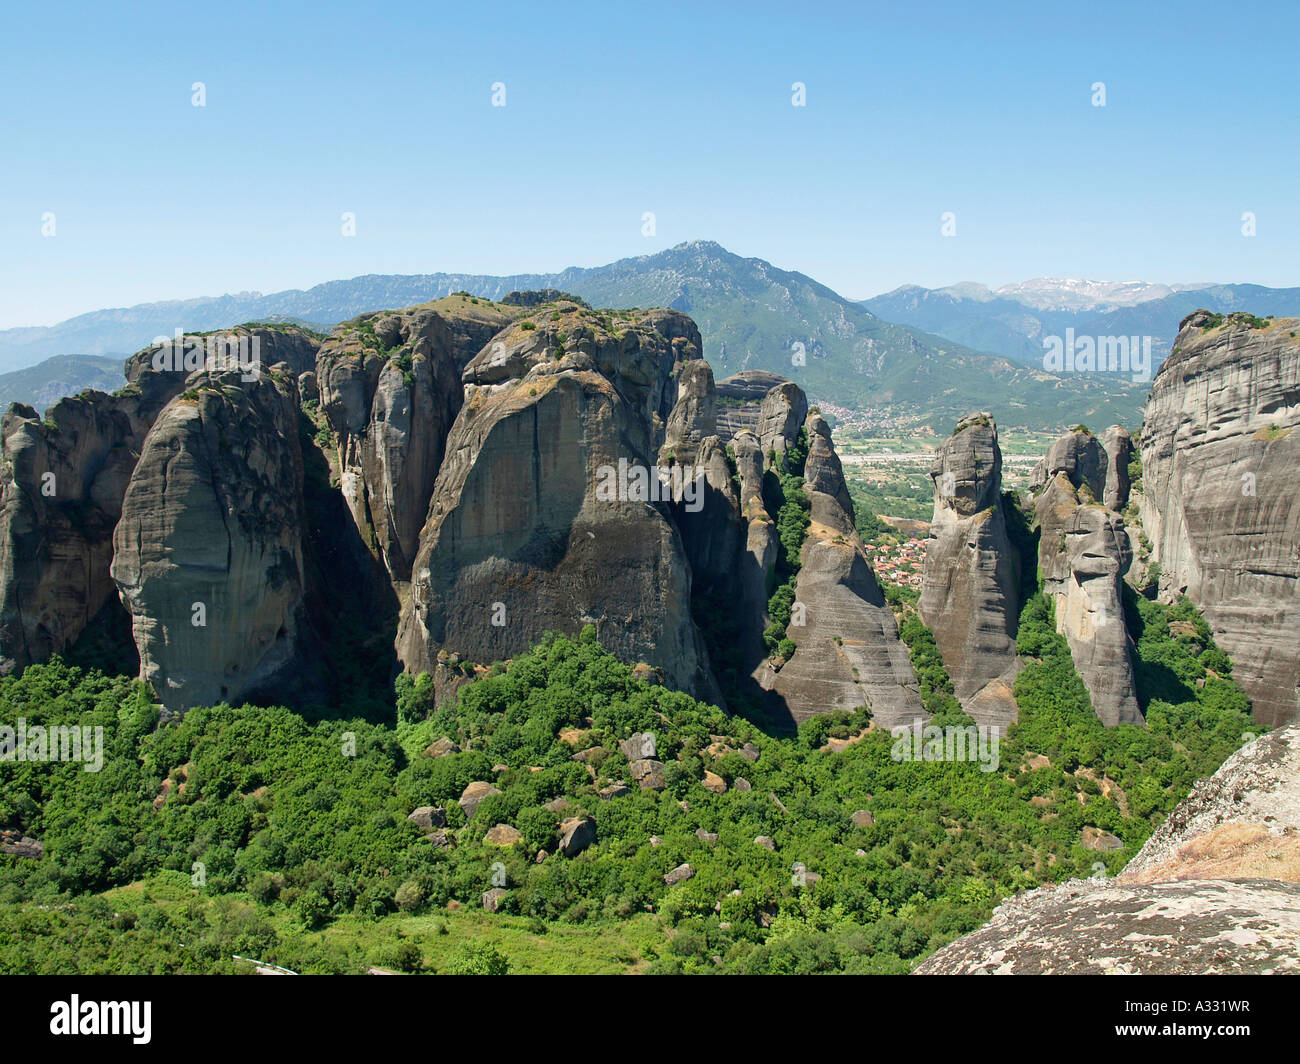 landscape with giant steep rocks in the area of Meteora in north eastern Greece on the plain of Thessaly Stock Photo